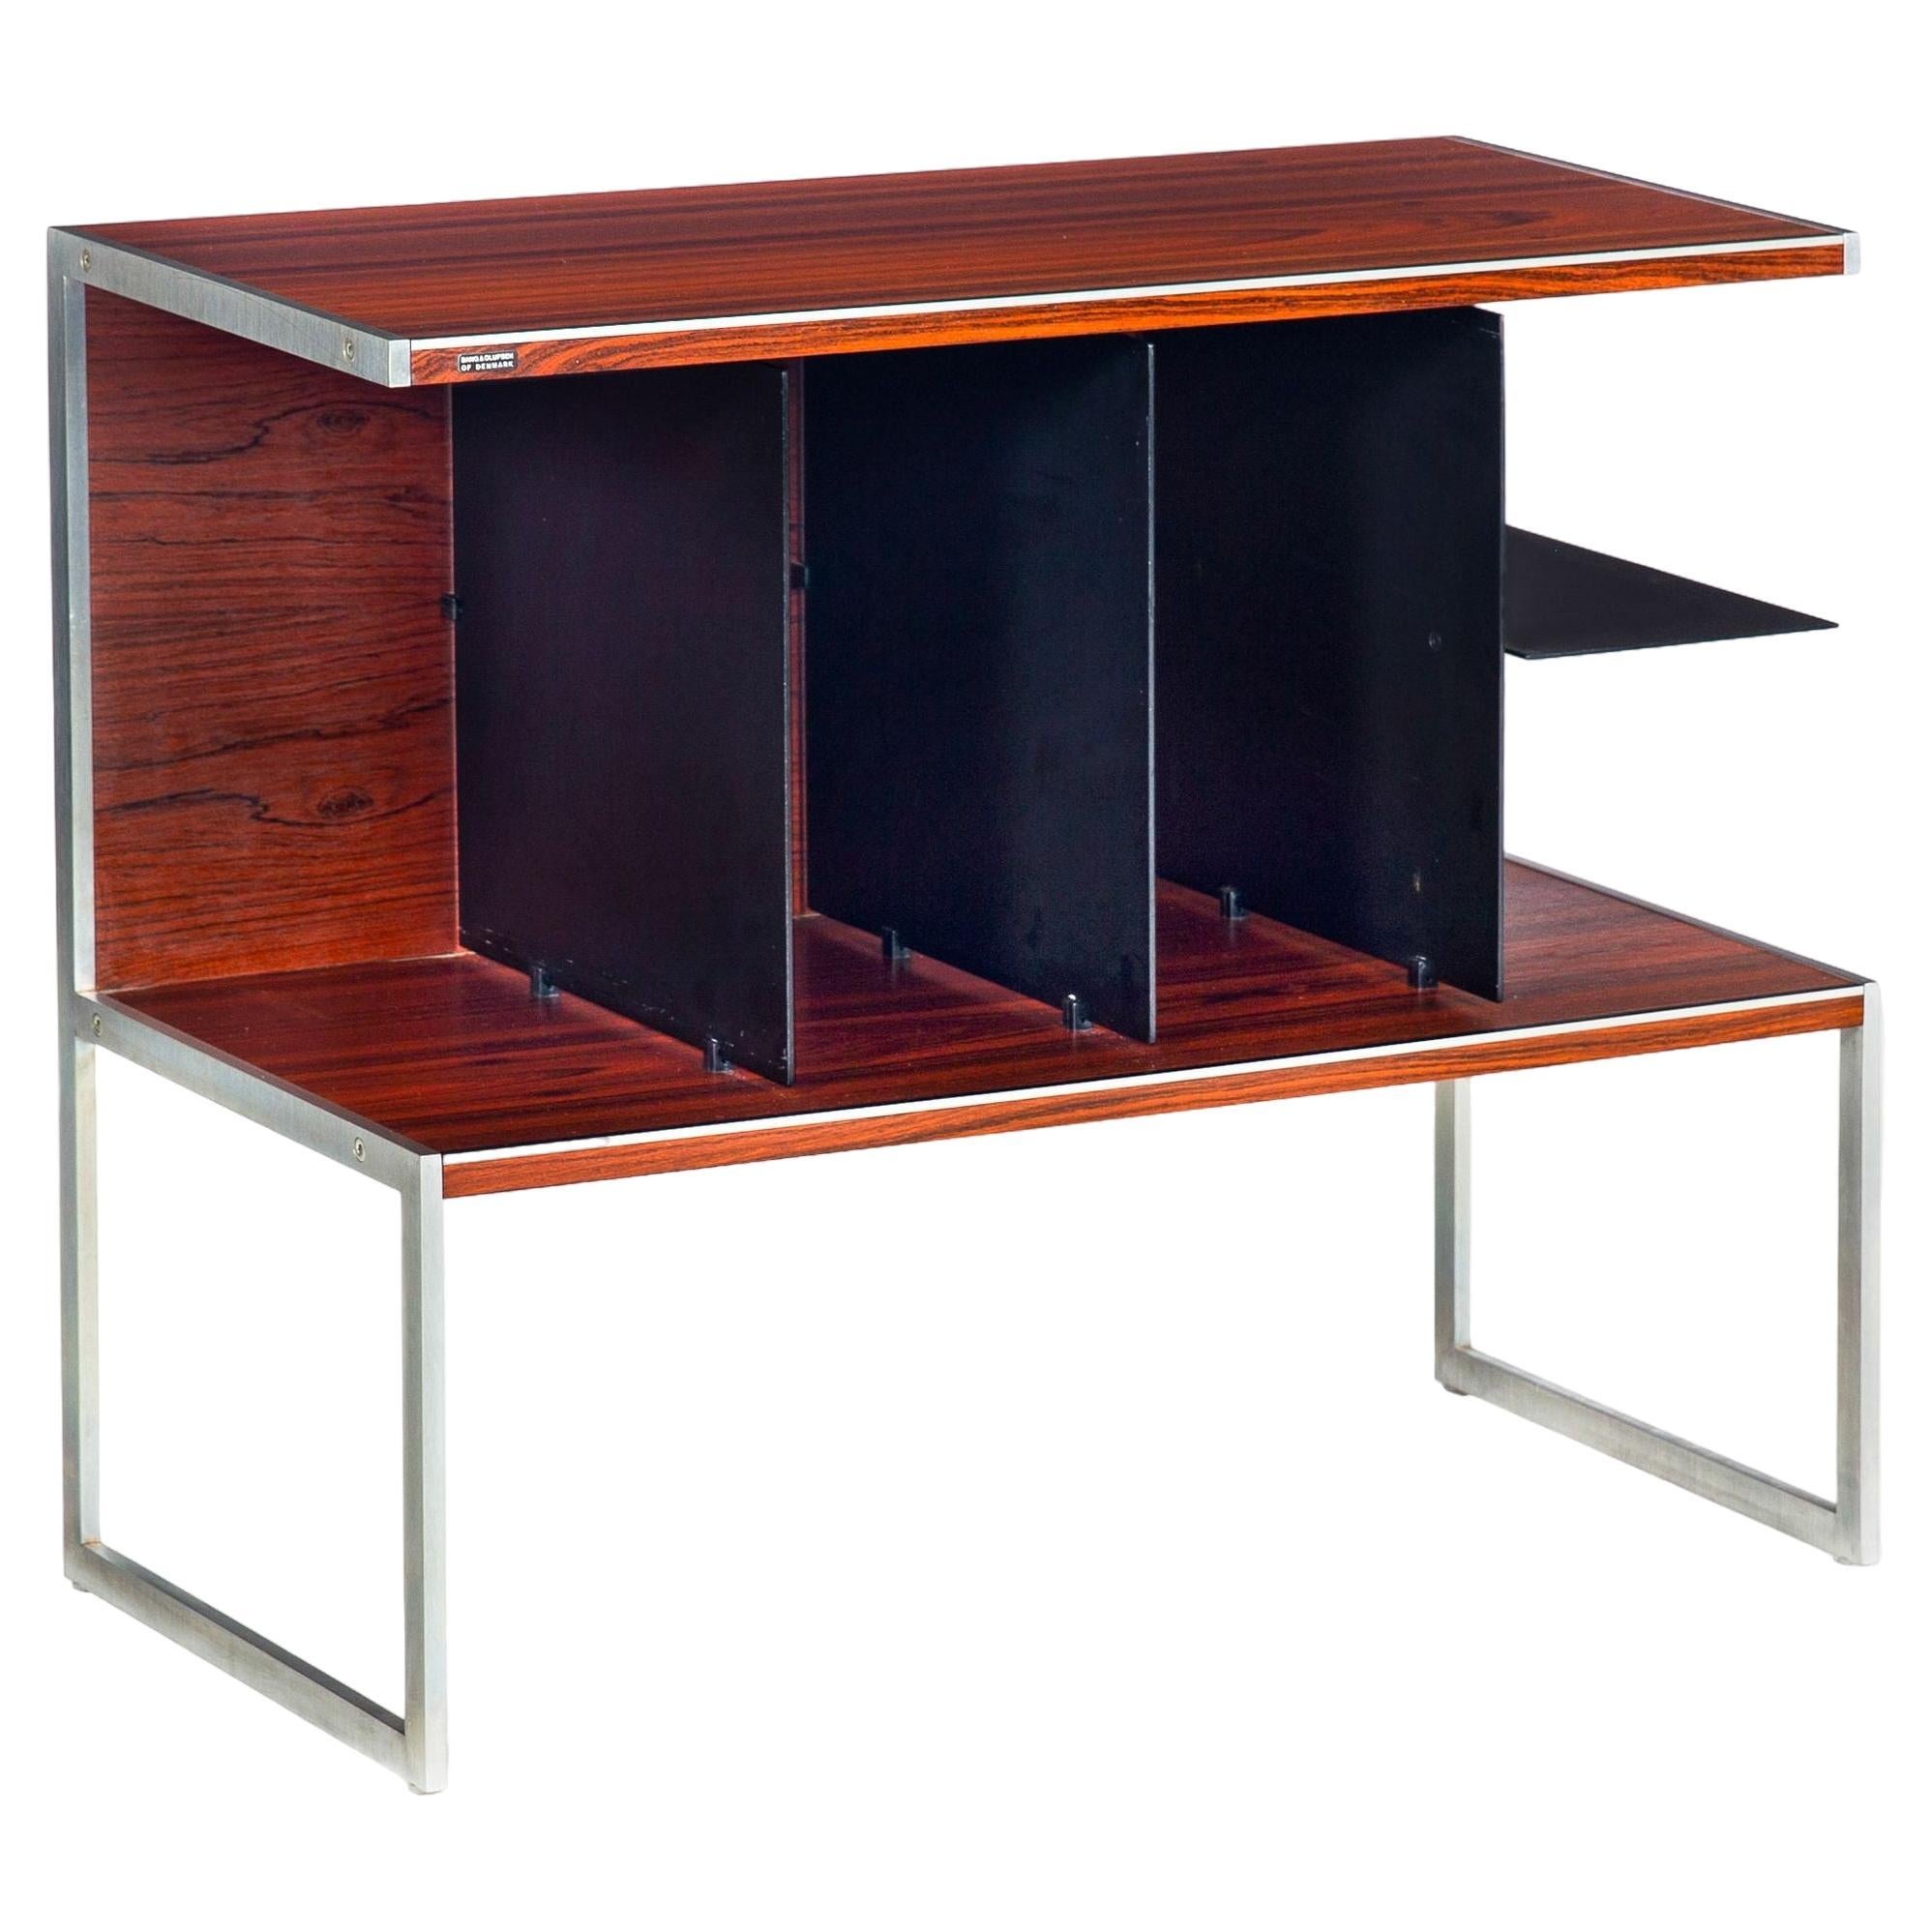 Rare Rosewood & Steel Media Shelf Console Table by Bang & Olufsen For Sale